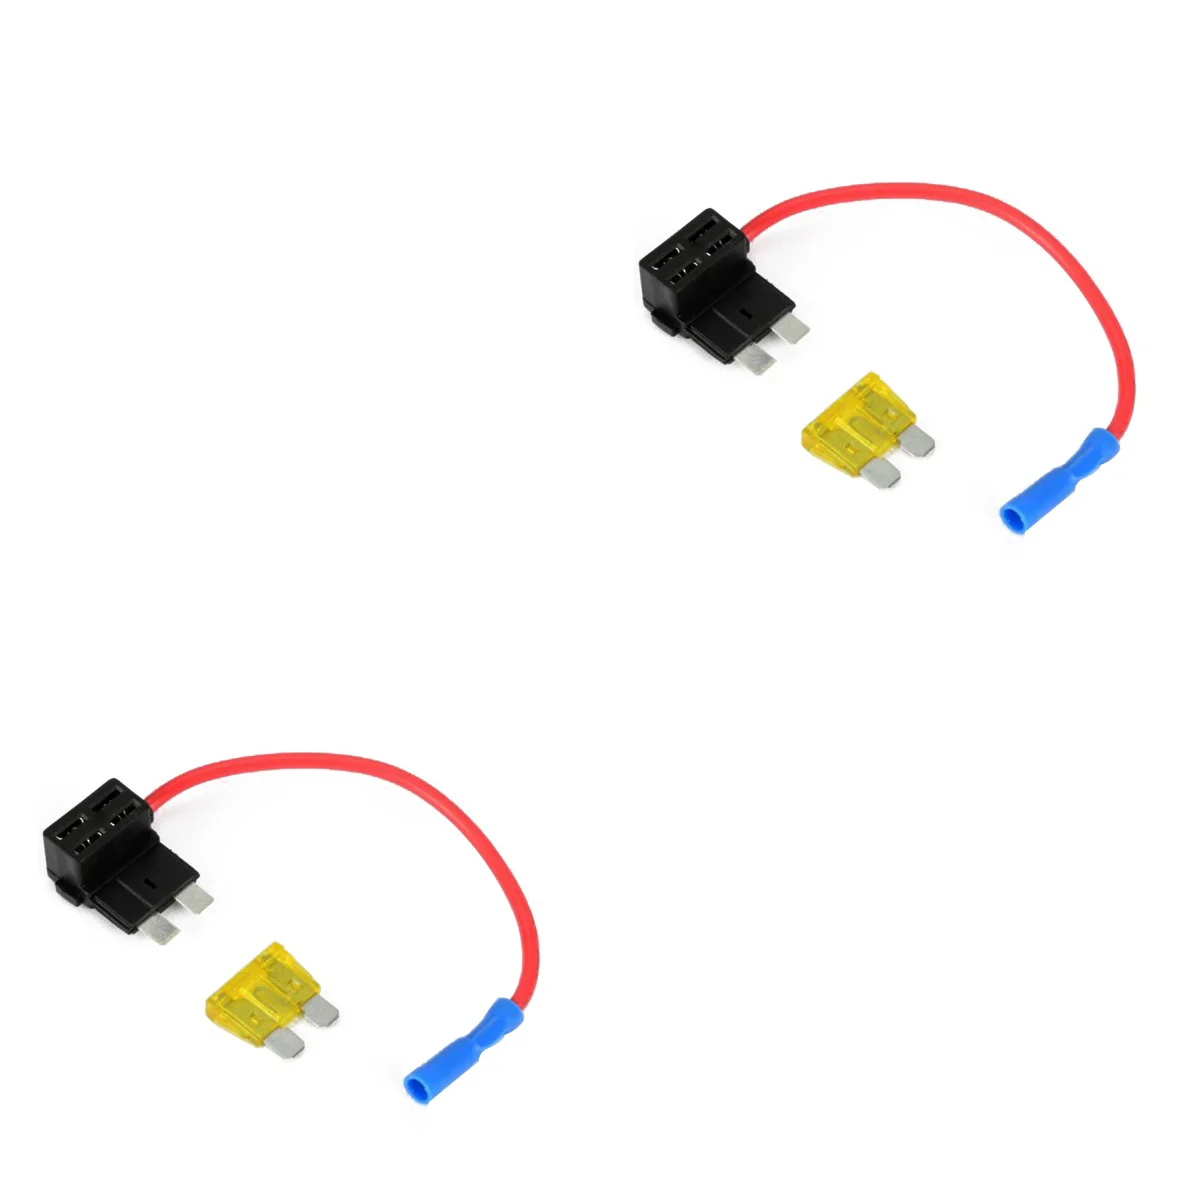 

2pcs 12V ATO ATC Add A Circuit Fuse Tap Piggy Back Standard Fuse Holder with 20A Fuse - Size M